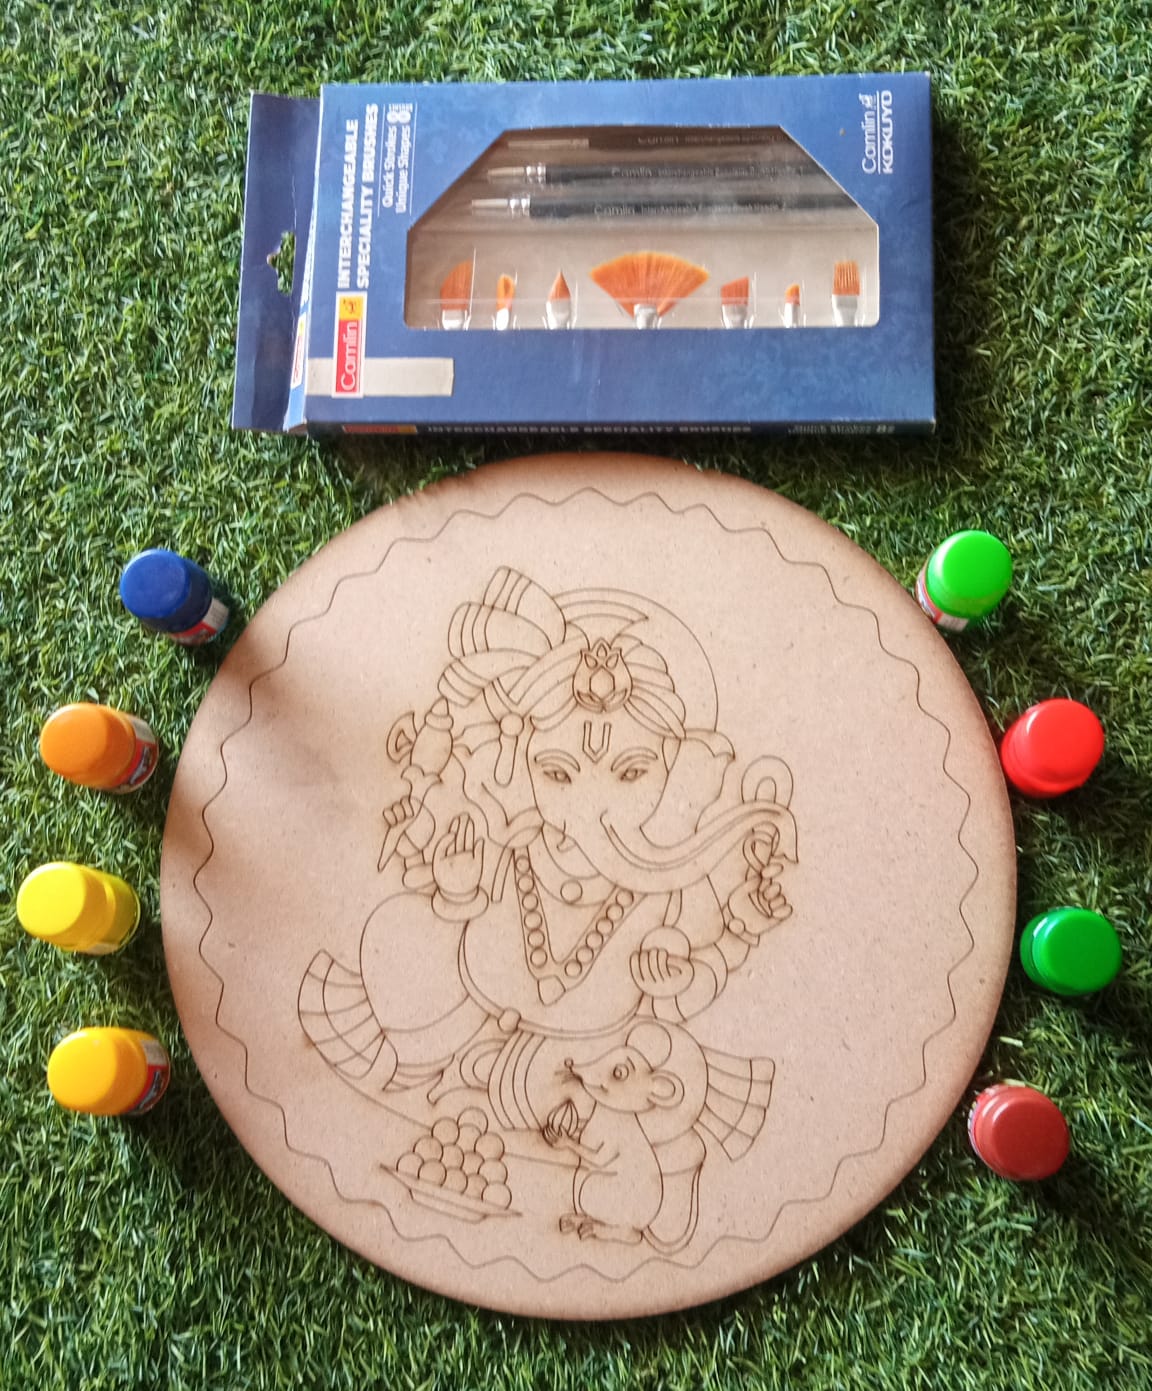 Ganesh Chaturthi Activities and Crafts to Keep Kids Busy